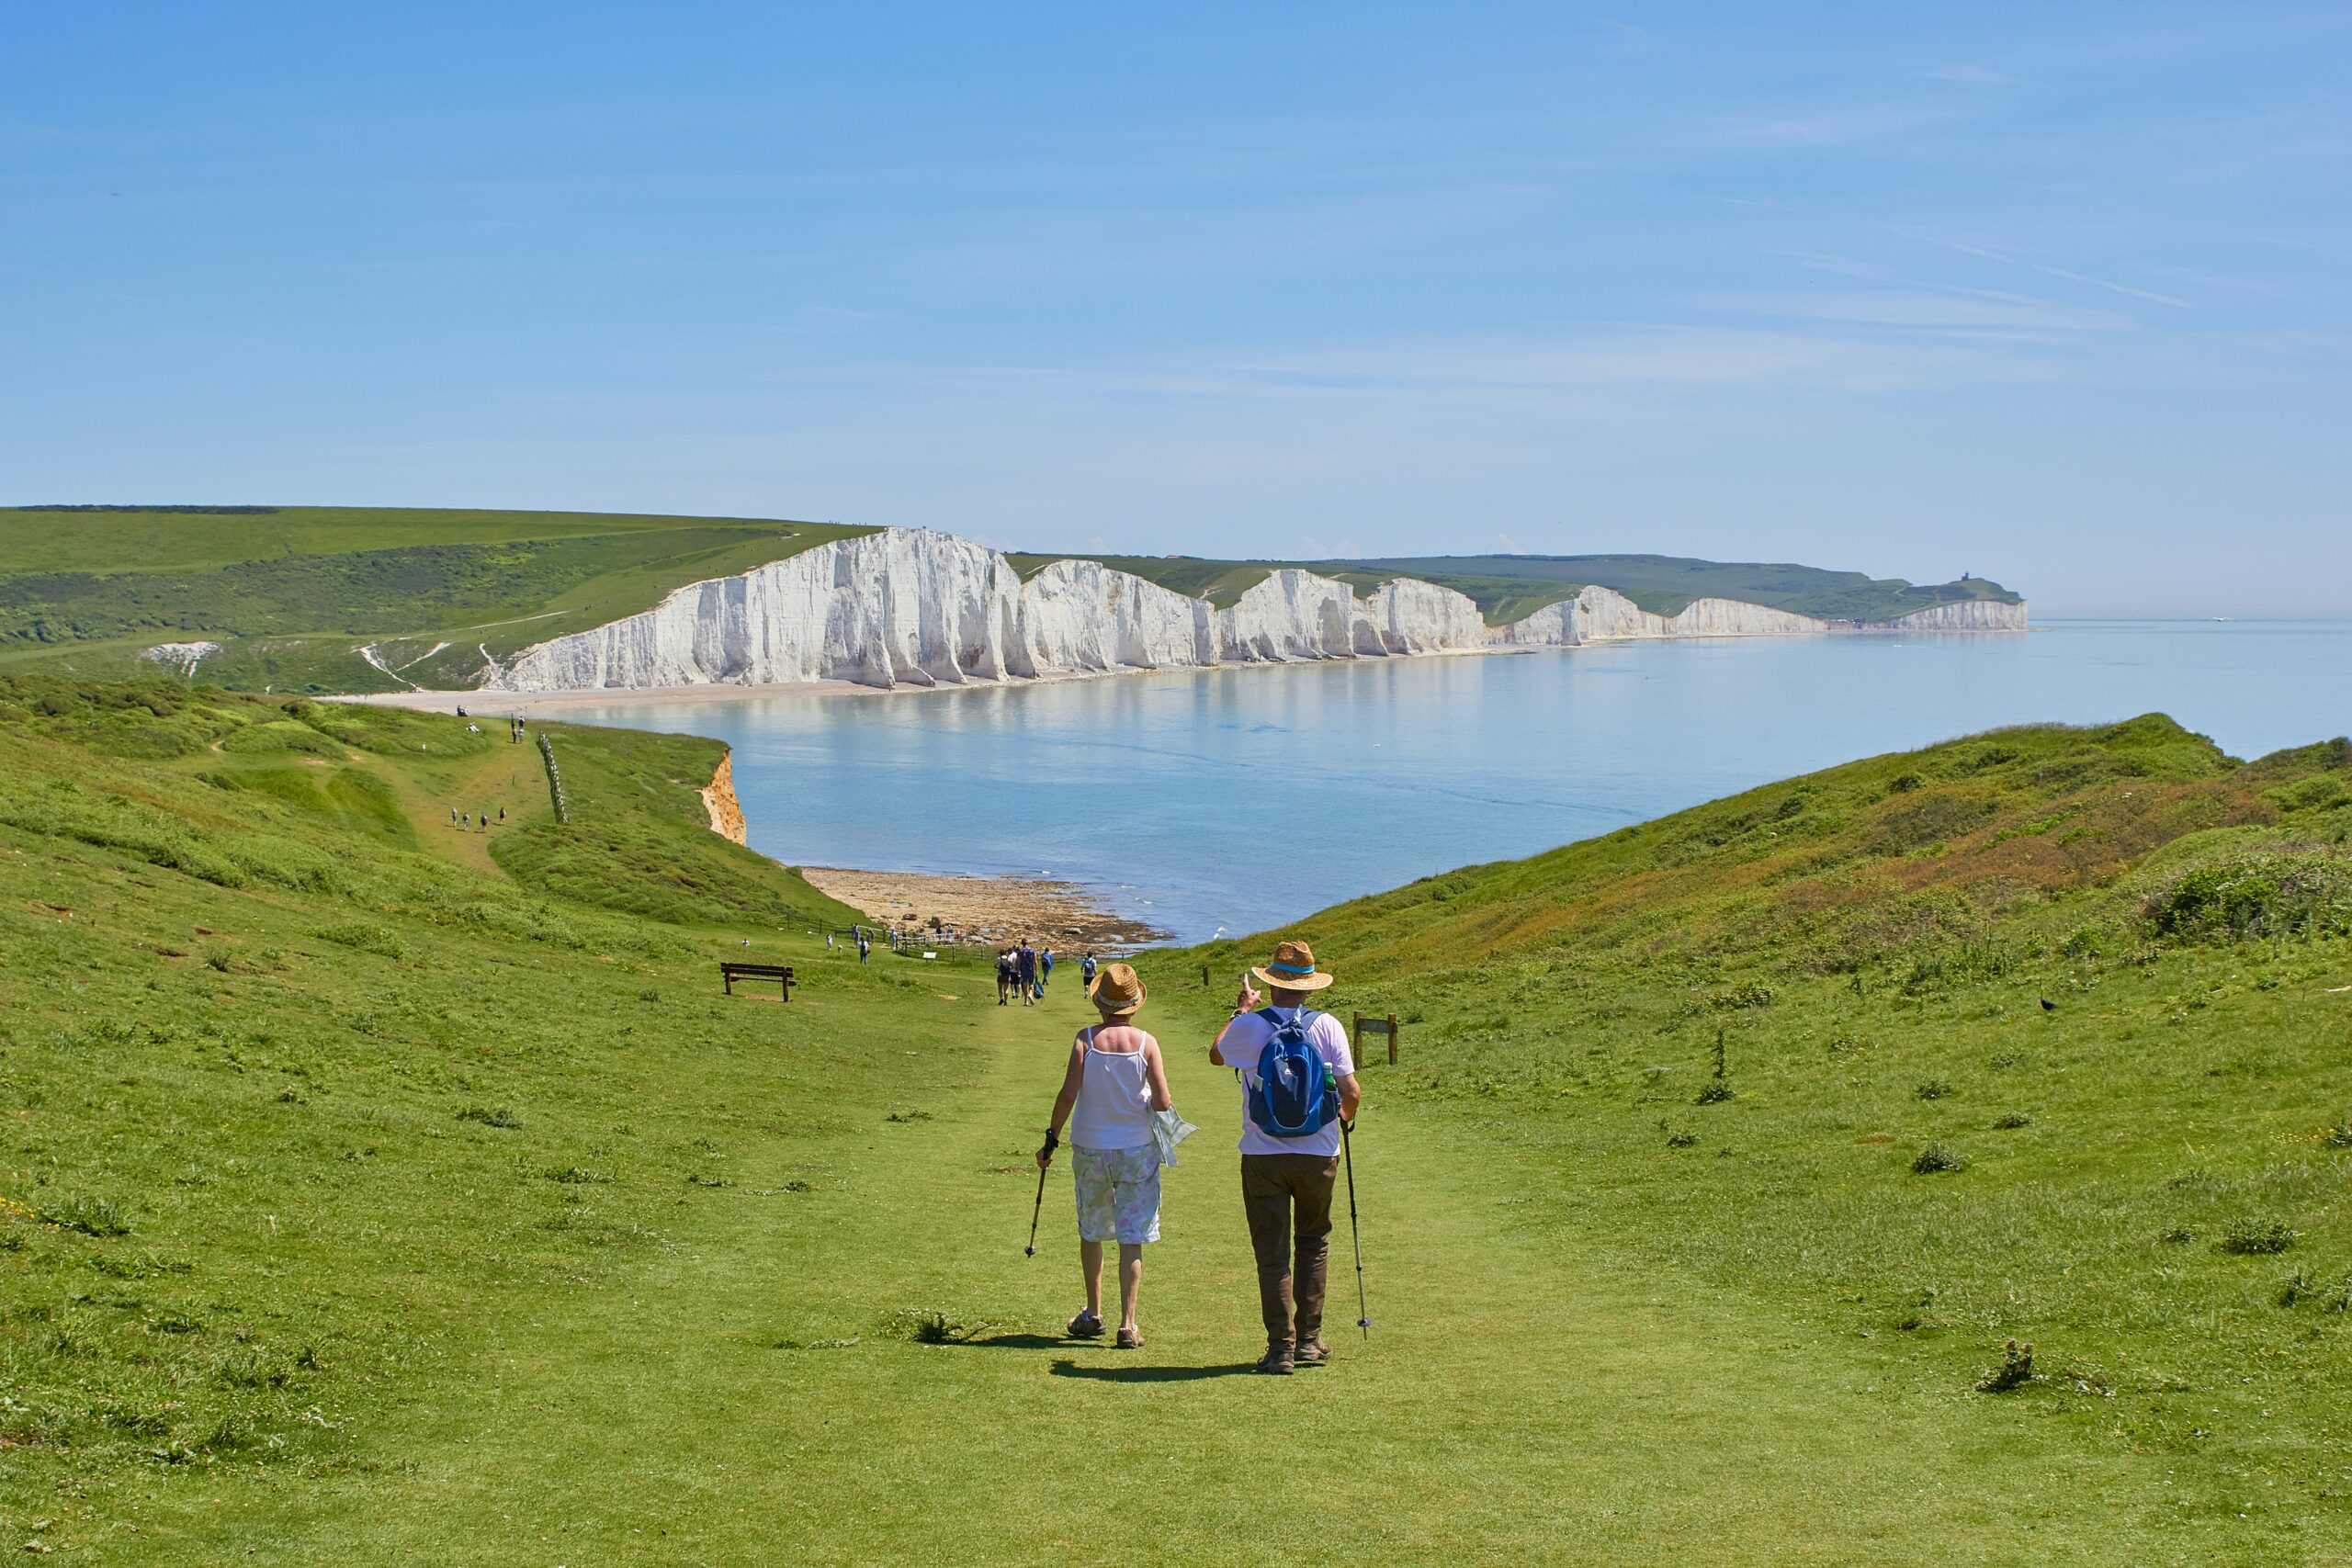 Couple hiking on a grassy path near water during their retirement